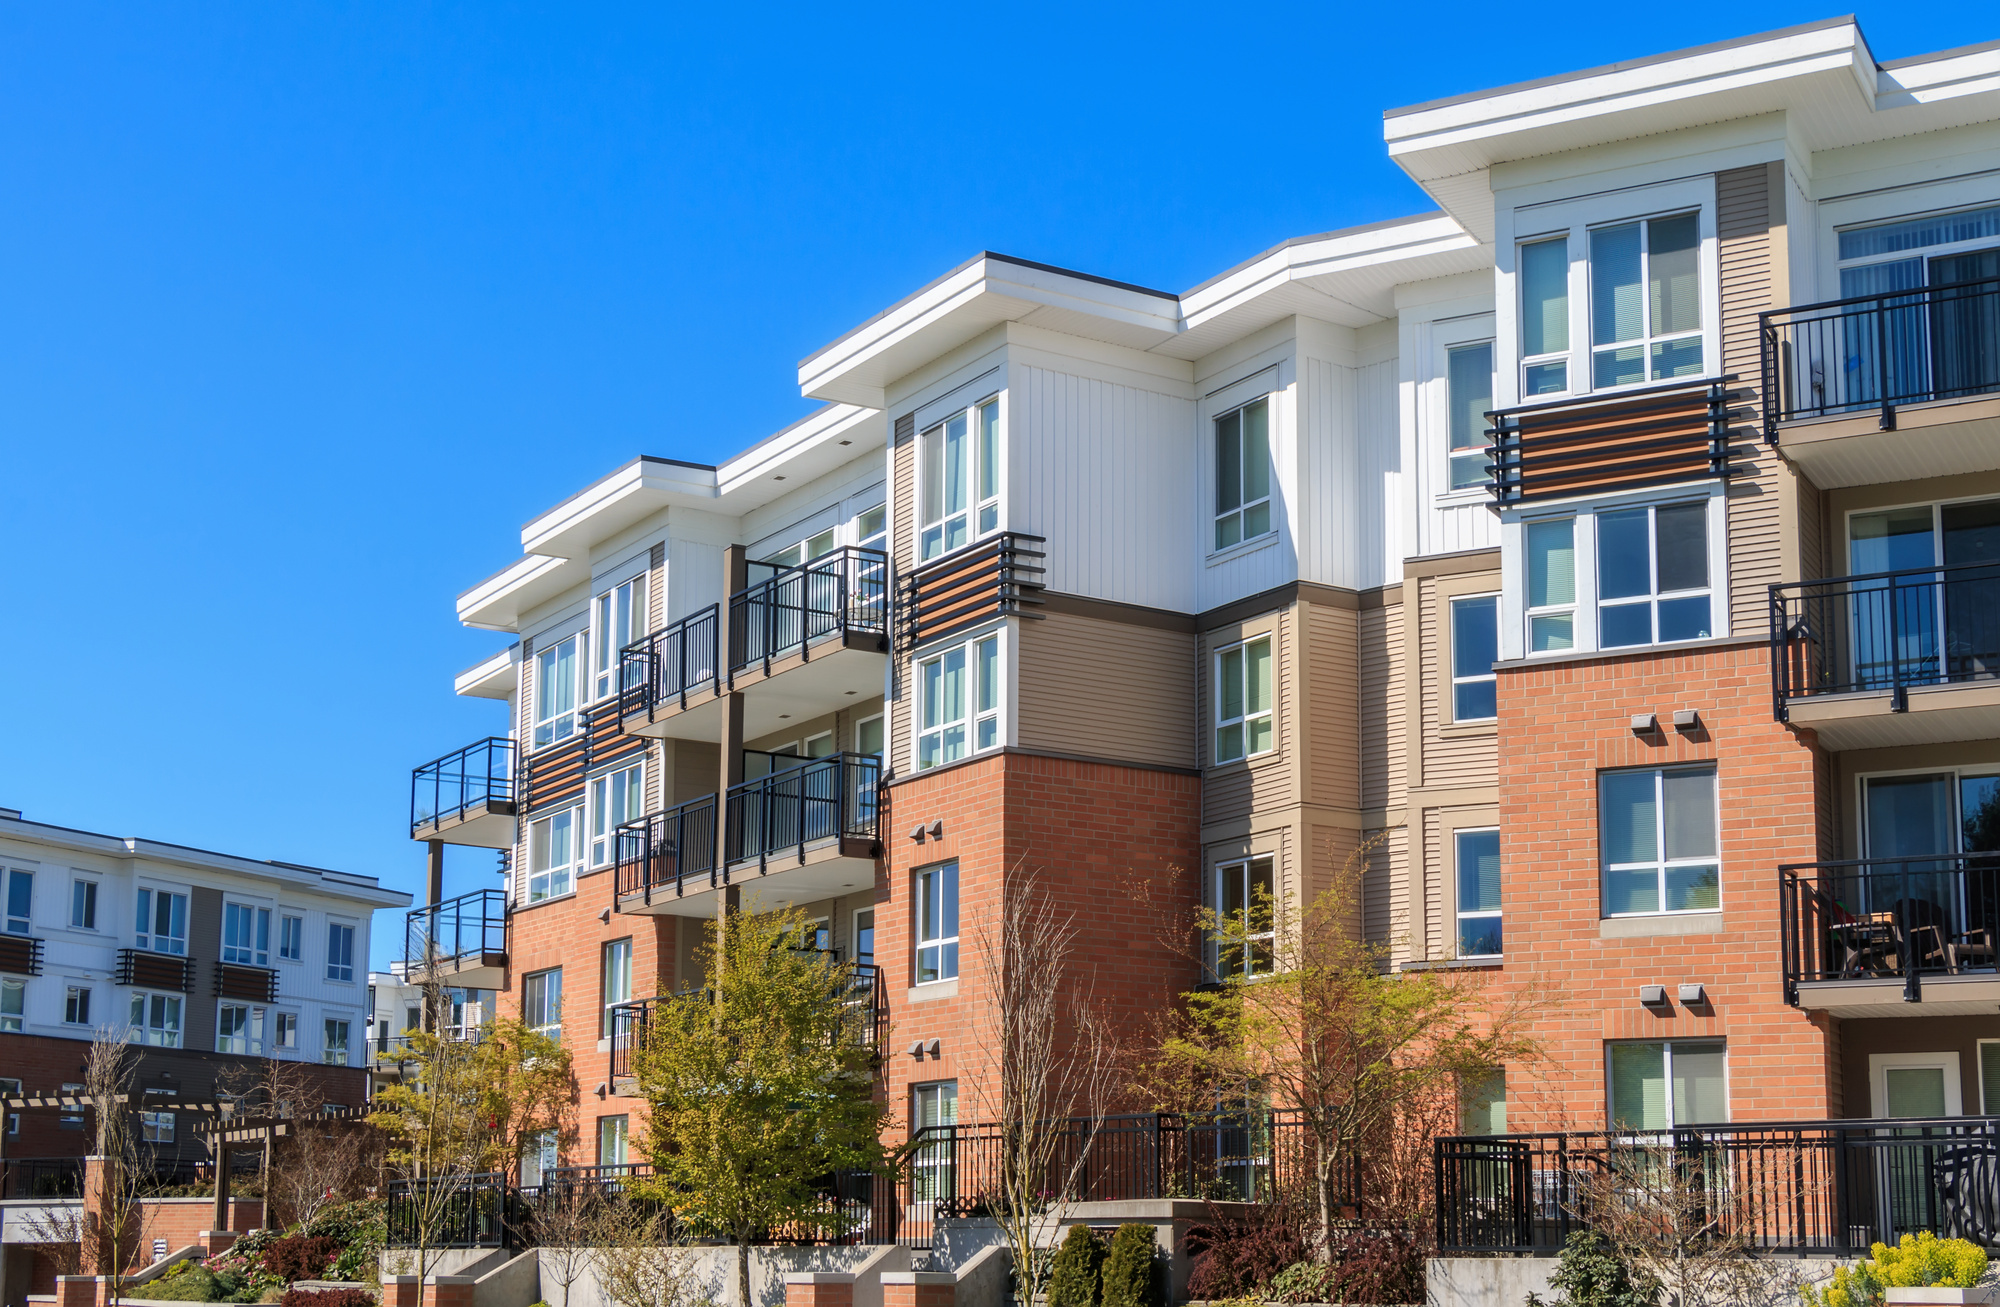 Condo vs. Apartment: Which Home Is Better for You?